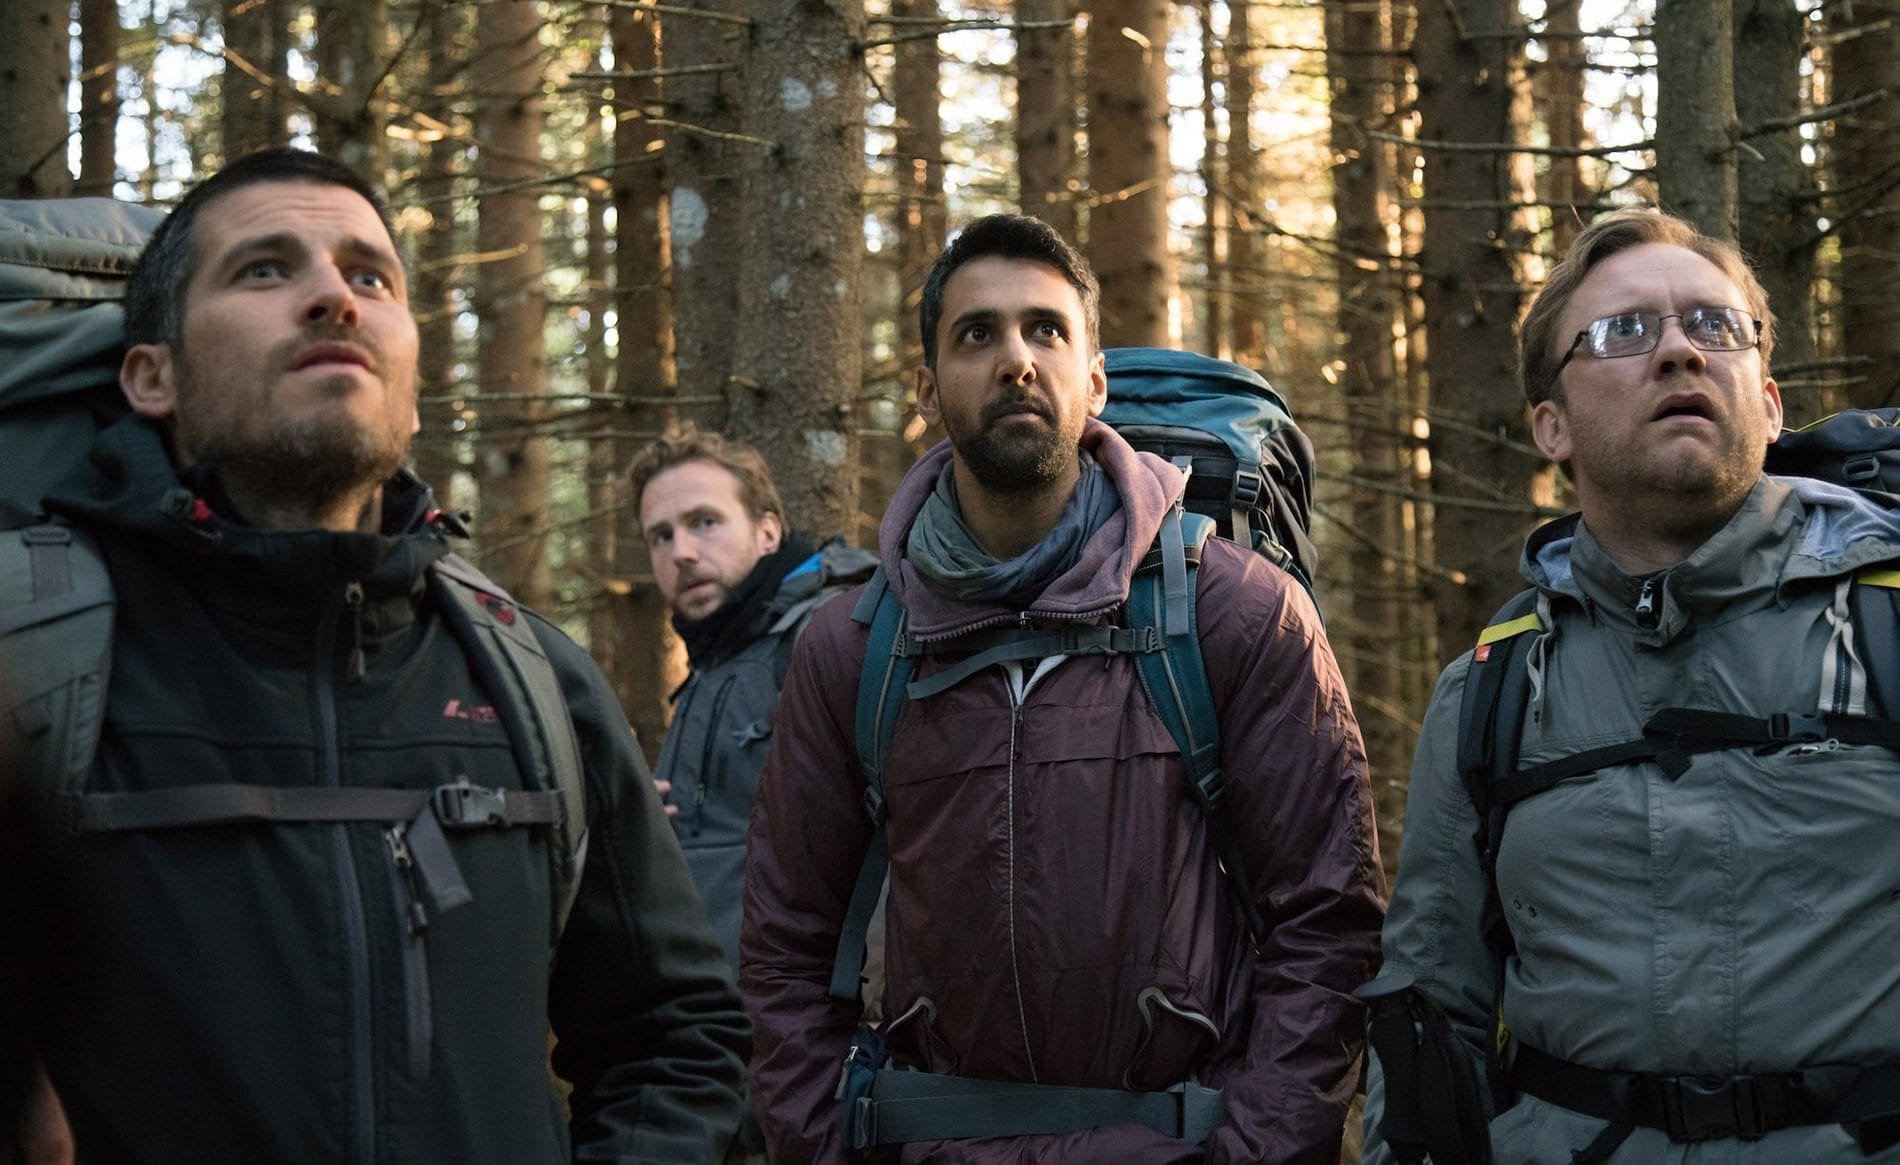 After the death of their friend, a group of old college friends embark on a hiking trip through an unnerving Scandinavian forest in ‘The Ritual’.